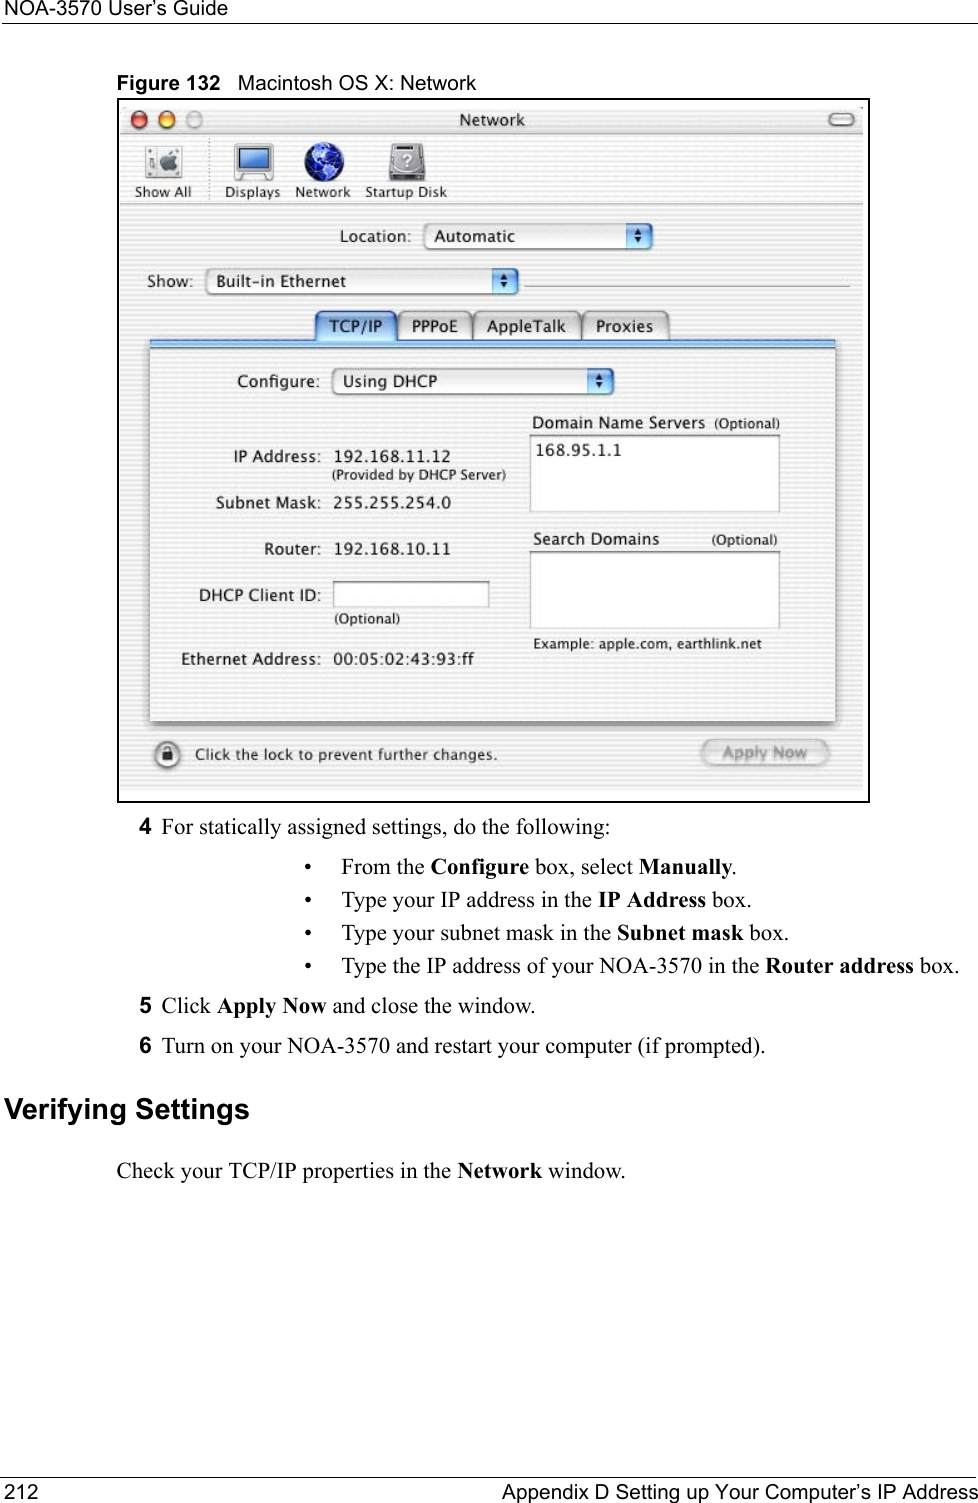 NOA-3570 User’s Guide212 Appendix D Setting up Your Computer’s IP AddressFigure 132   Macintosh OS X: Network4For statically assigned settings, do the following:•From the Configure box, select Manually.• Type your IP address in the IP Address box.• Type your subnet mask in the Subnet mask box.• Type the IP address of your NOA-3570 in the Router address box.5Click Apply Now and close the window.6Turn on your NOA-3570 and restart your computer (if prompted).Verifying SettingsCheck your TCP/IP properties in the Network window.